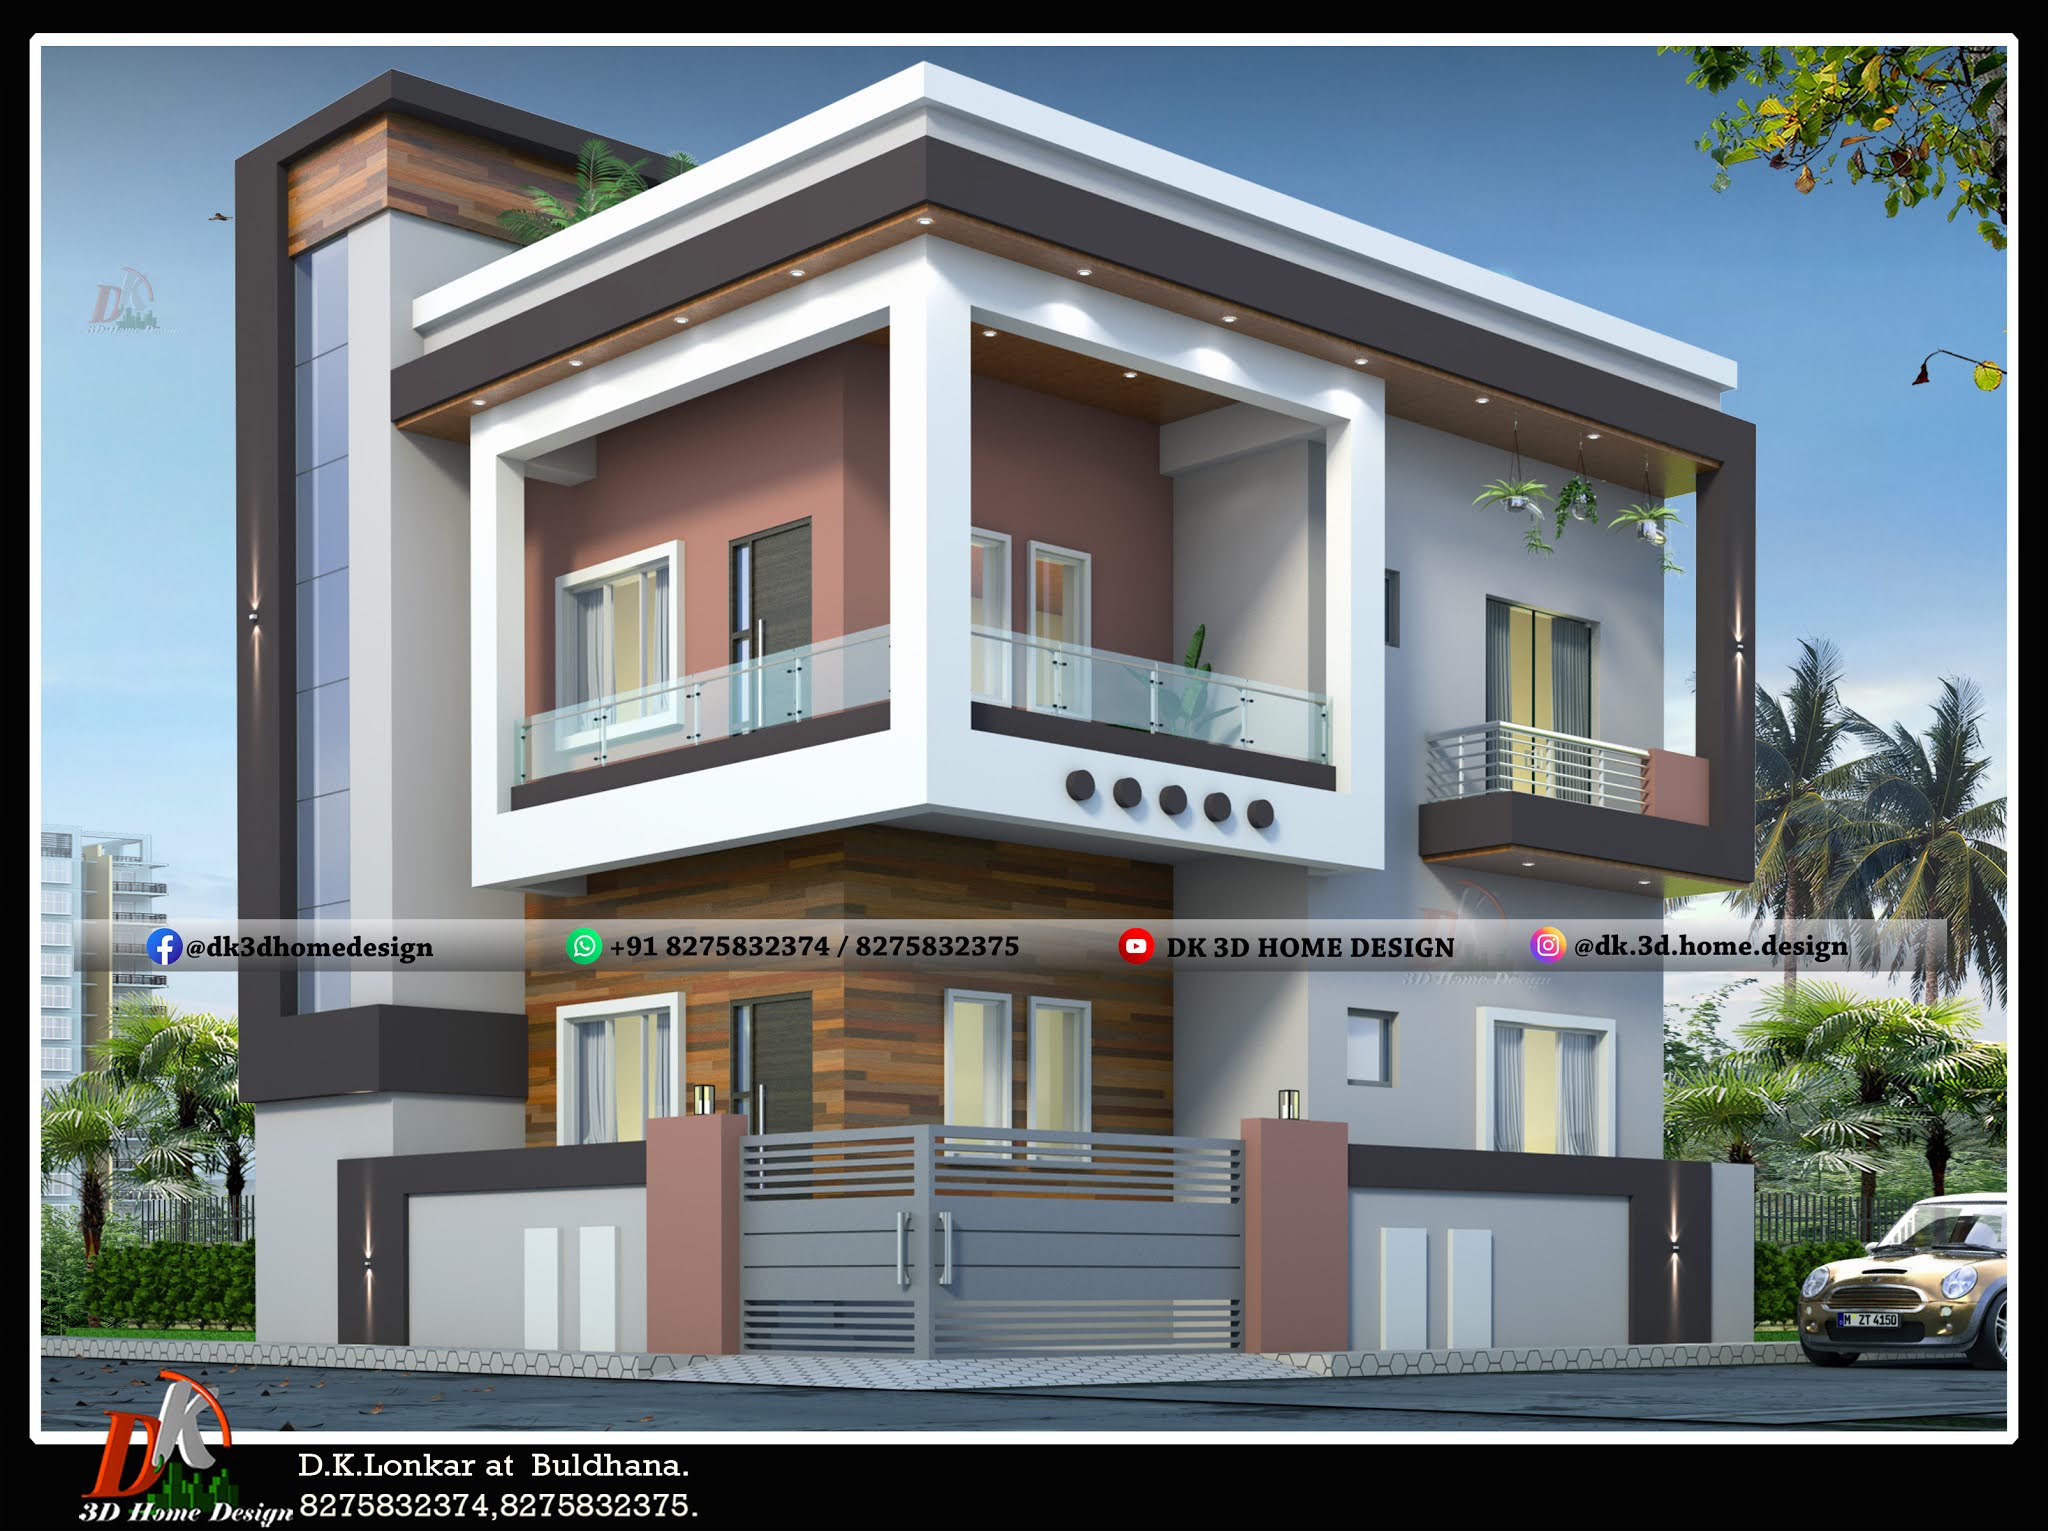 3D Home Design & Plans: Some Amazing 3D House Designs Made By DK 3D